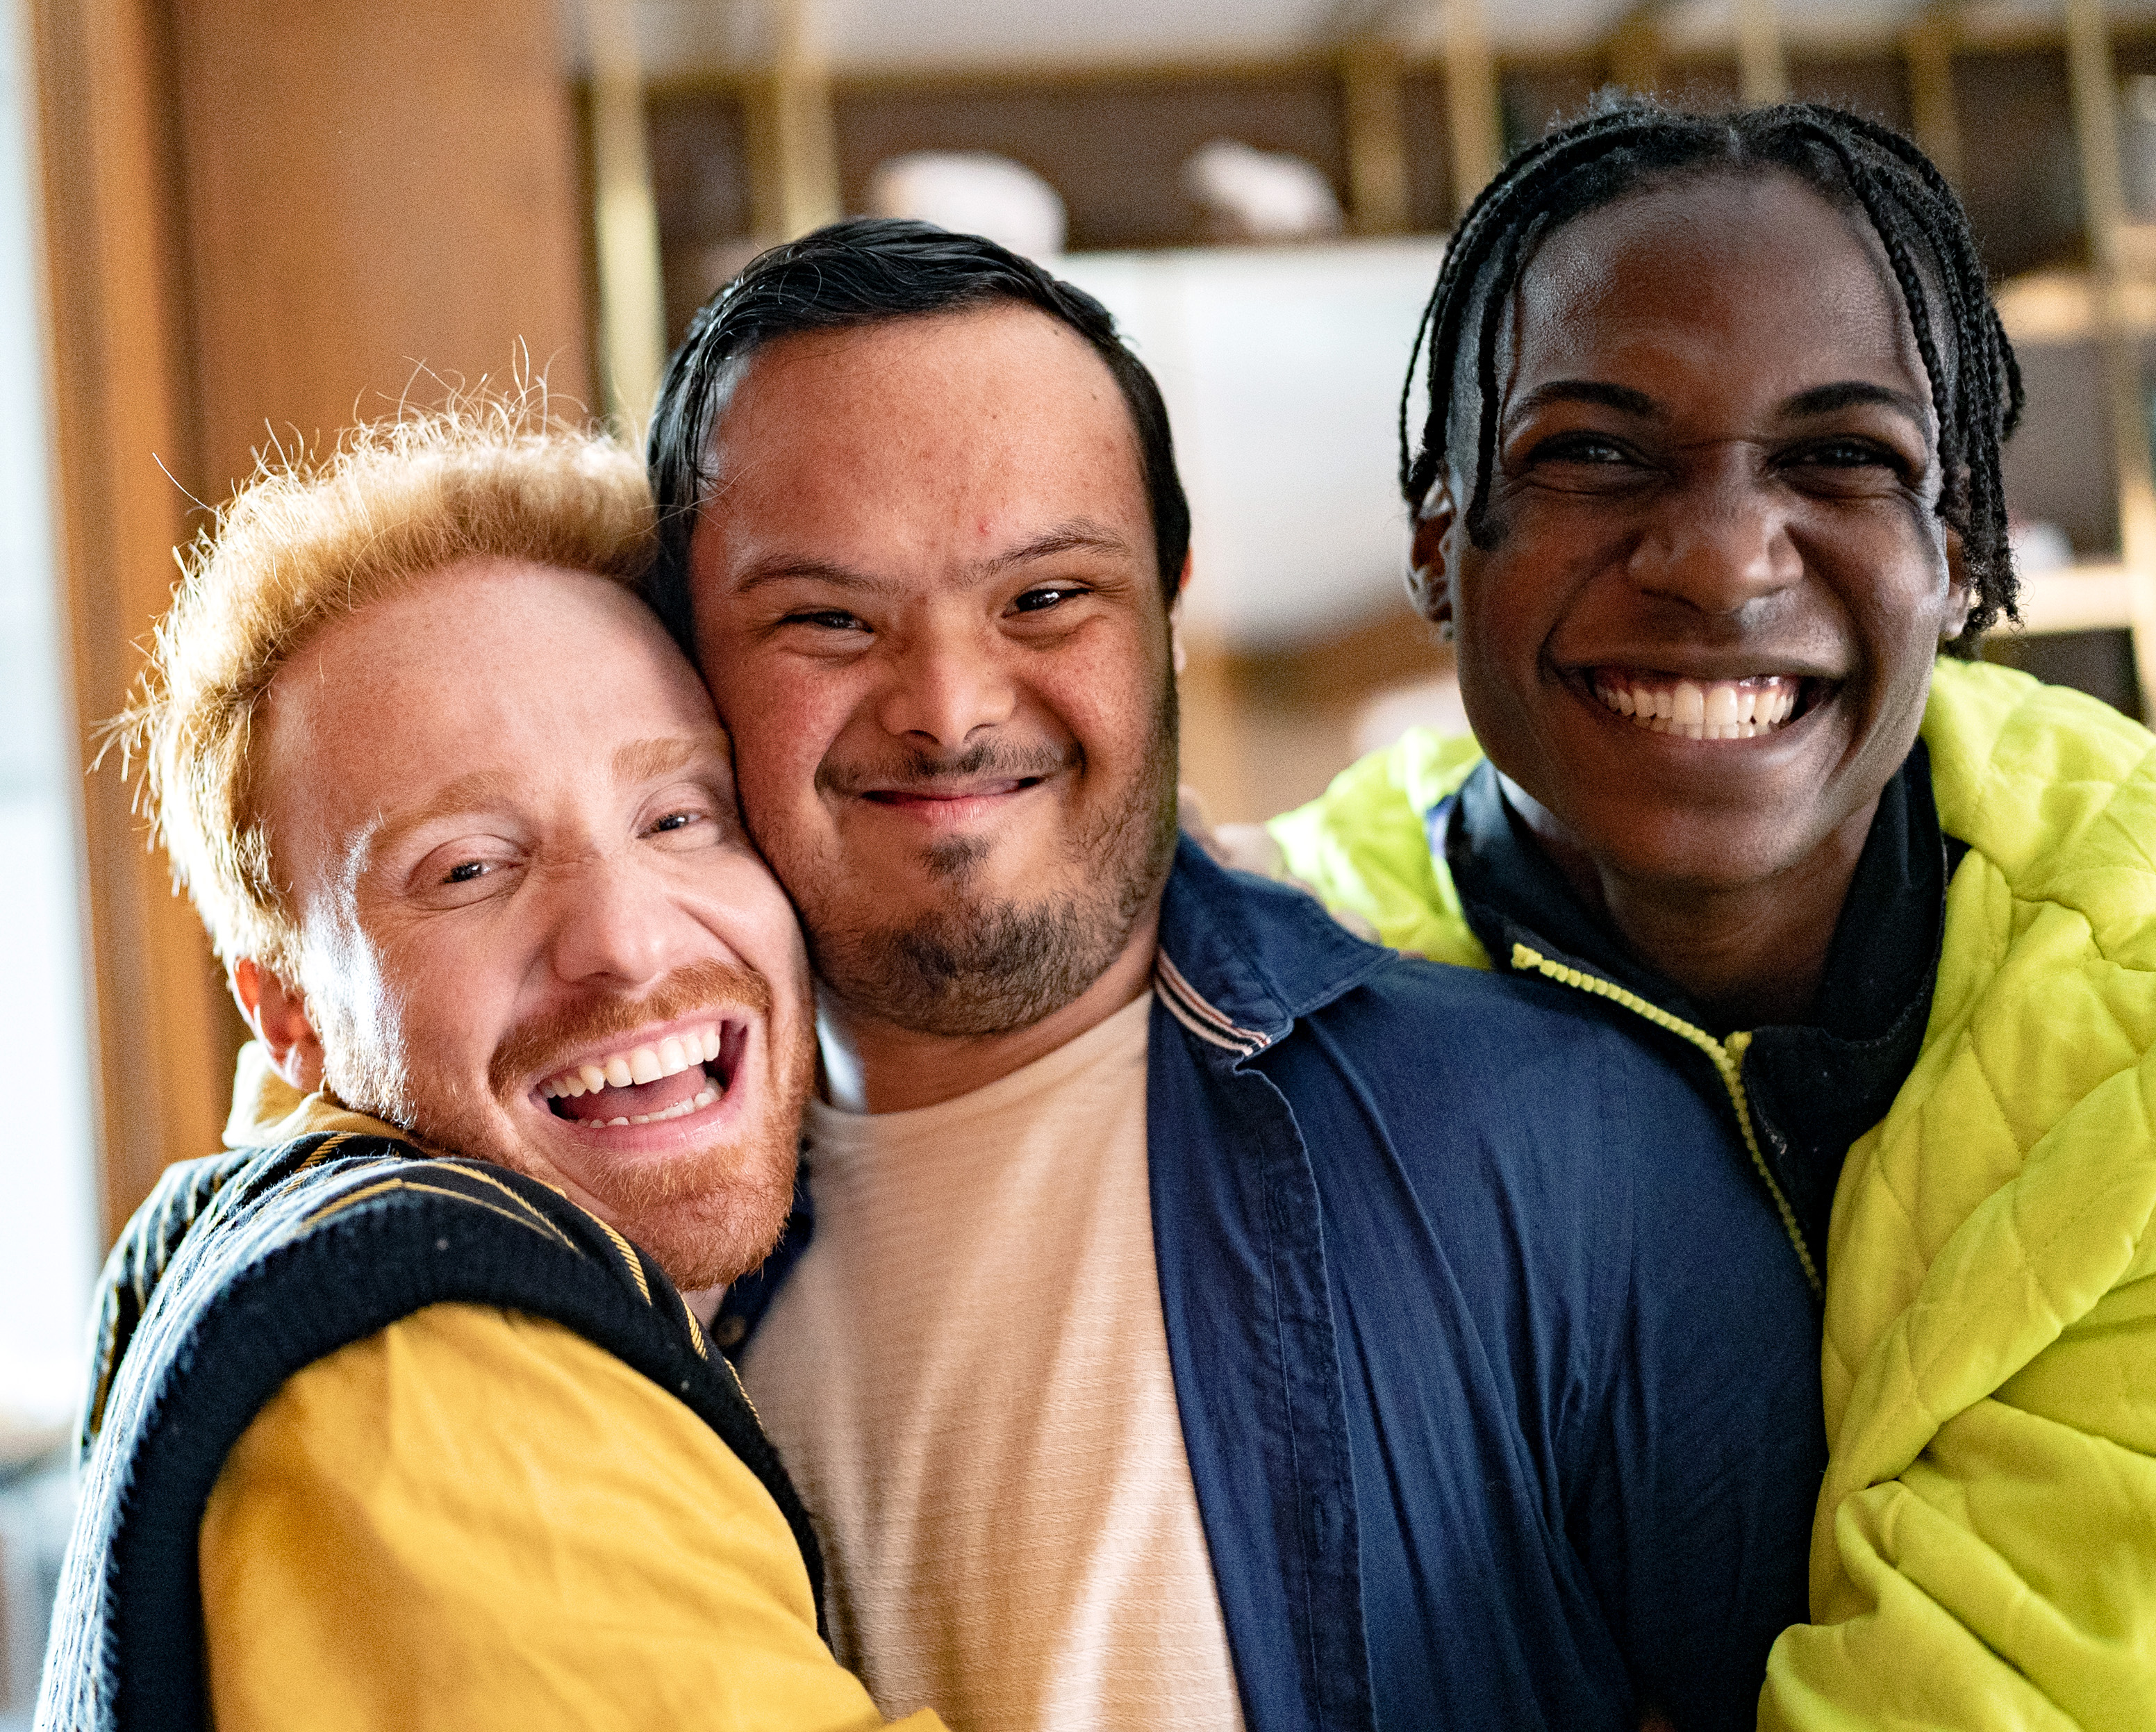 "A man with red hair and a beard and a man with dark hair and a beard who has Down syndrome and a man with black hair and braids smile while in an embrace as they pose for a photograph"